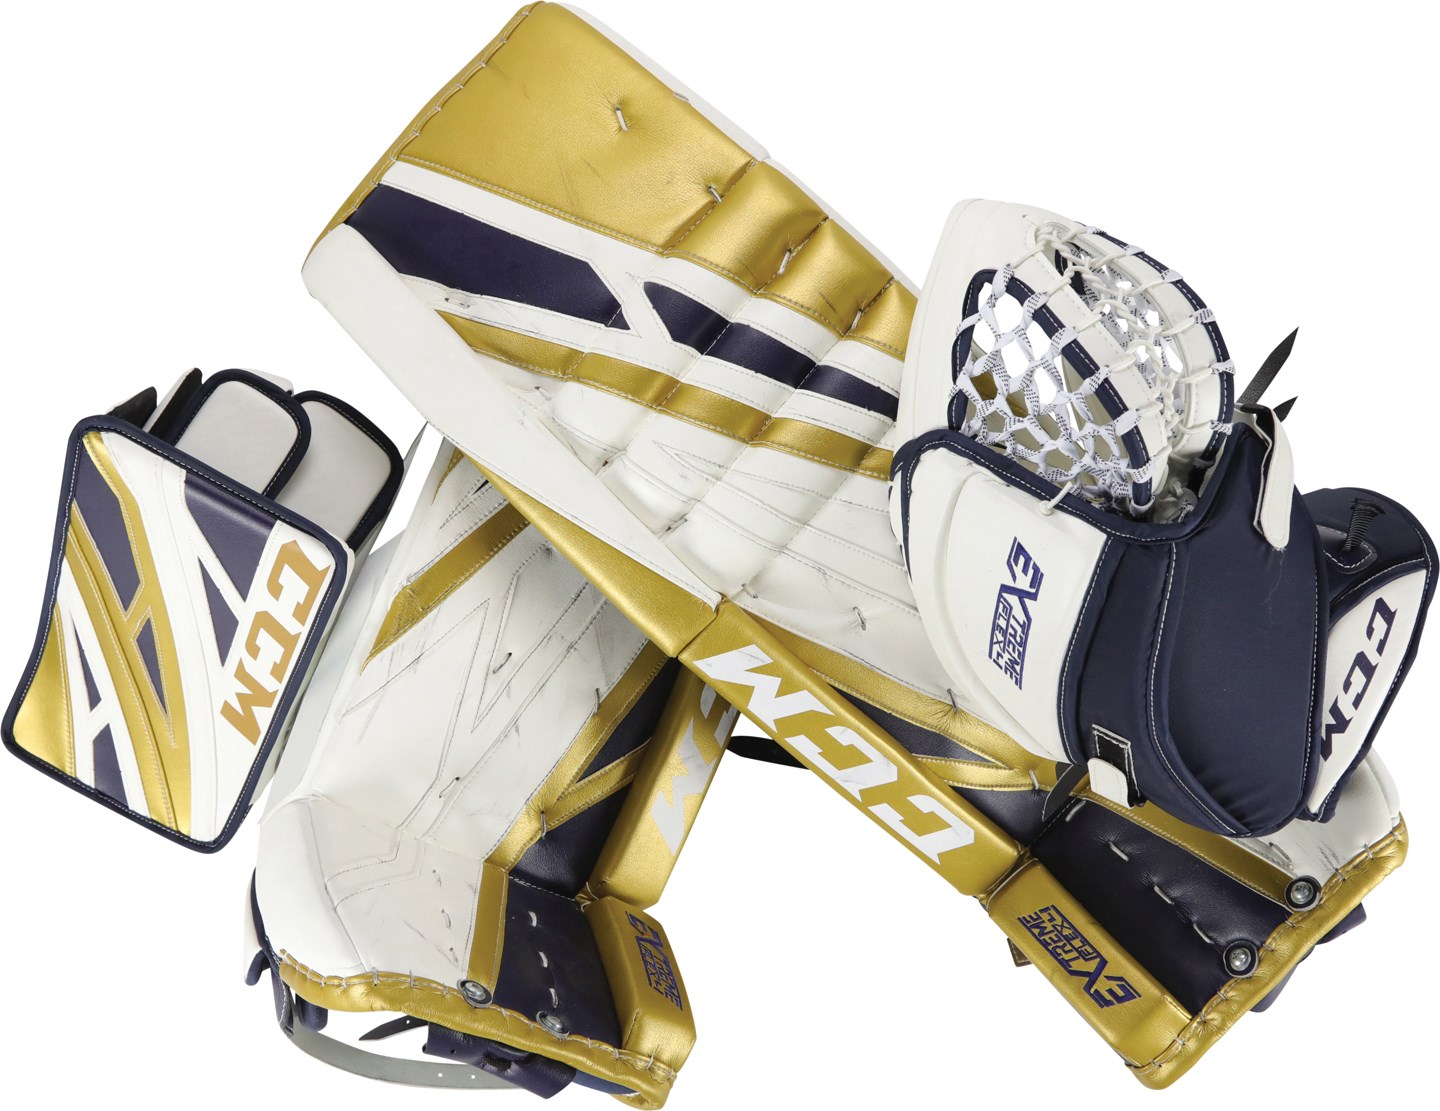 Hockey - Buffalo Sabres 50th Anniversary Carter Hutton Game Used Goalie Pads and Issued Gloves